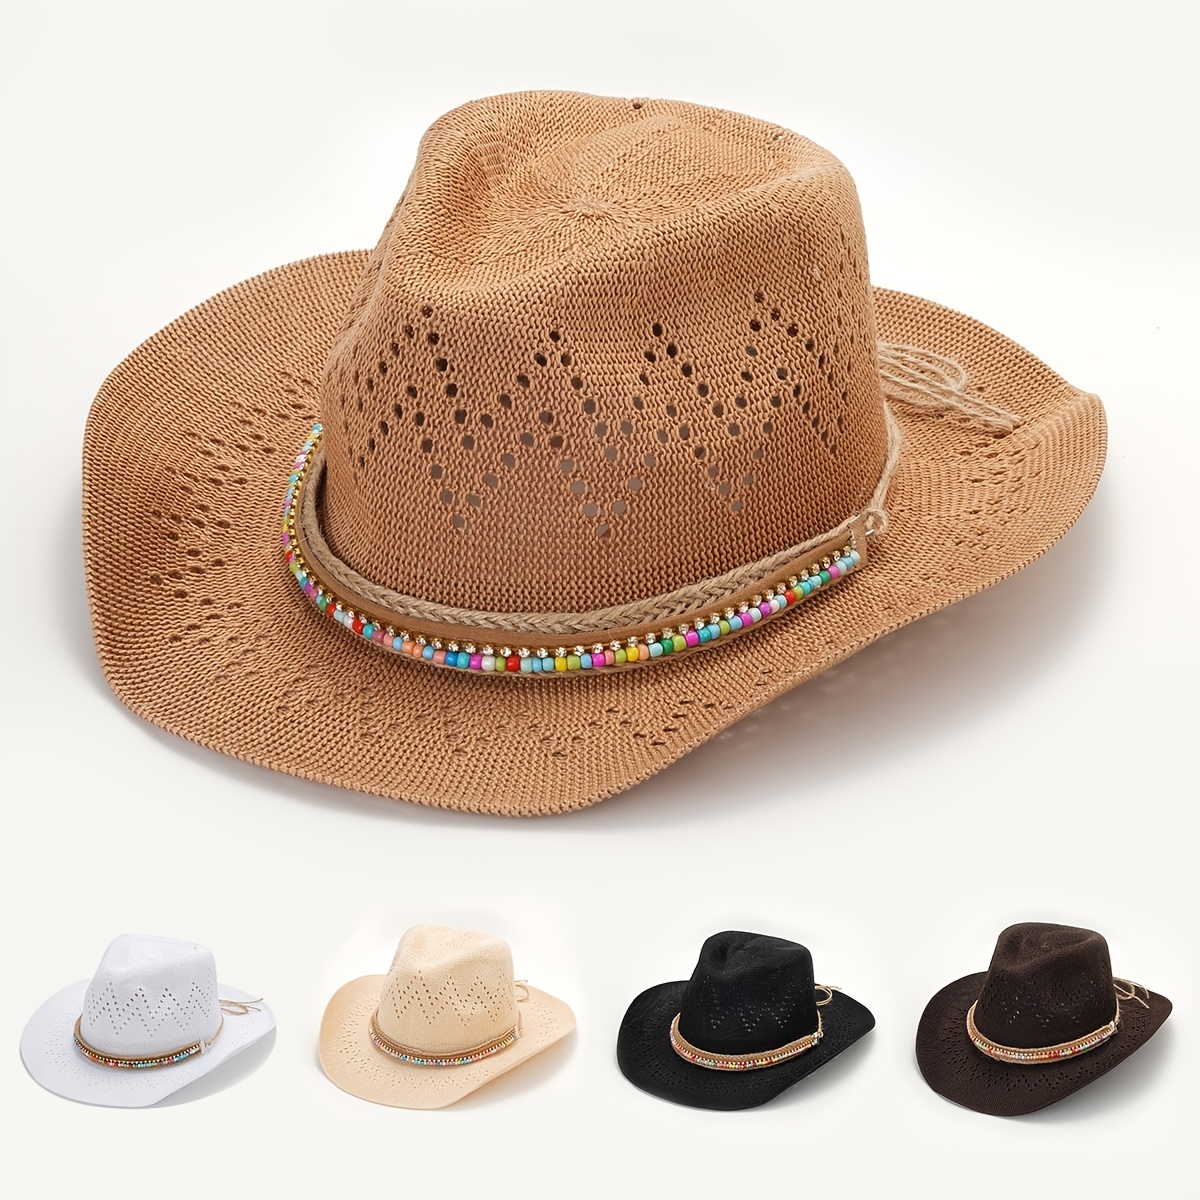 Homiton 10Pcs Cowboy Hat Band Replacement Handmade Ethnic Western